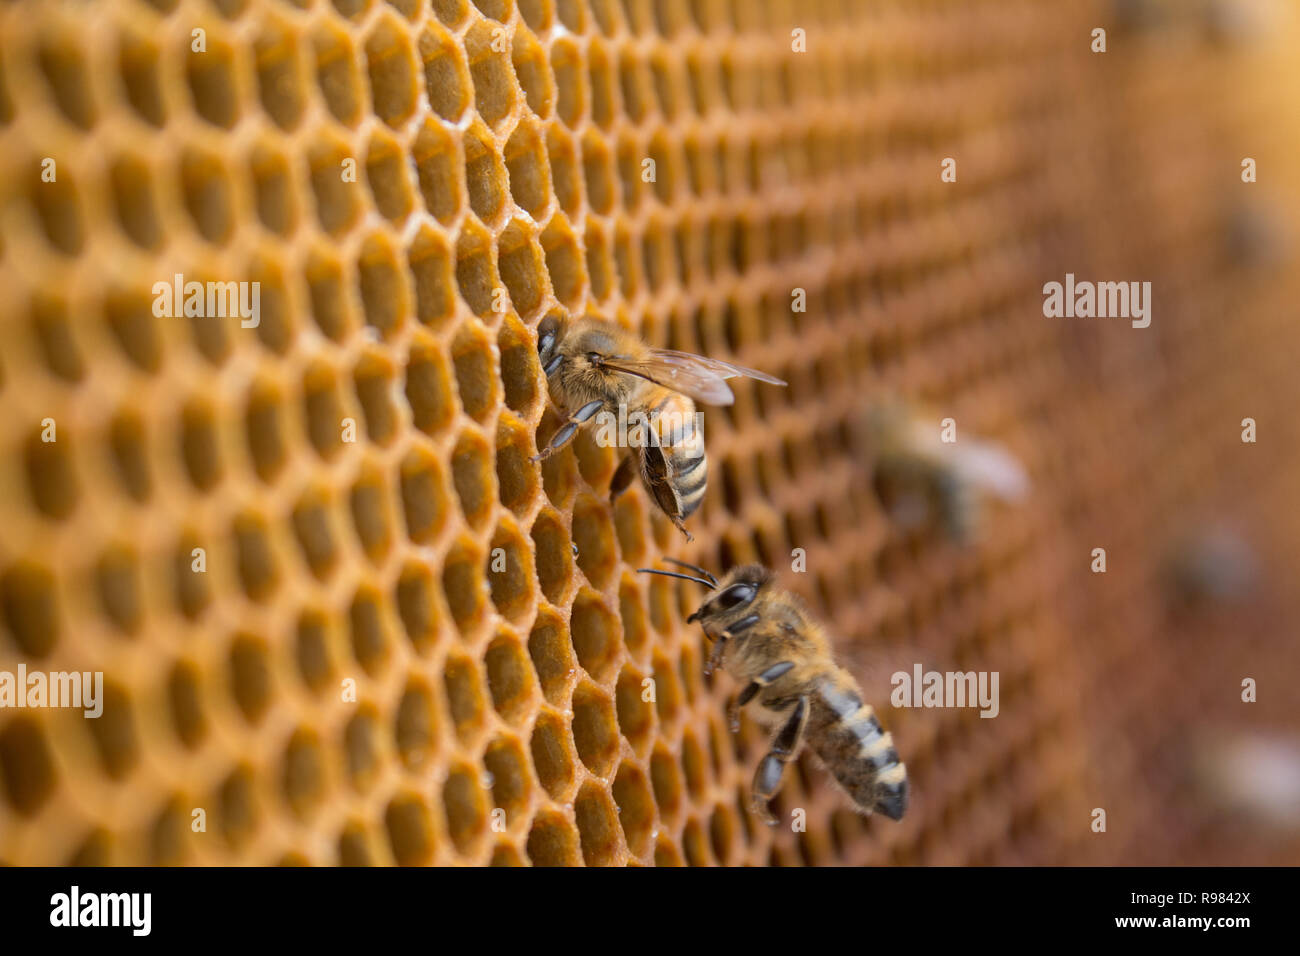 Honey bees on a honeycomb inside beehive. Hexagonal wax structure with blur background. Stock Photo